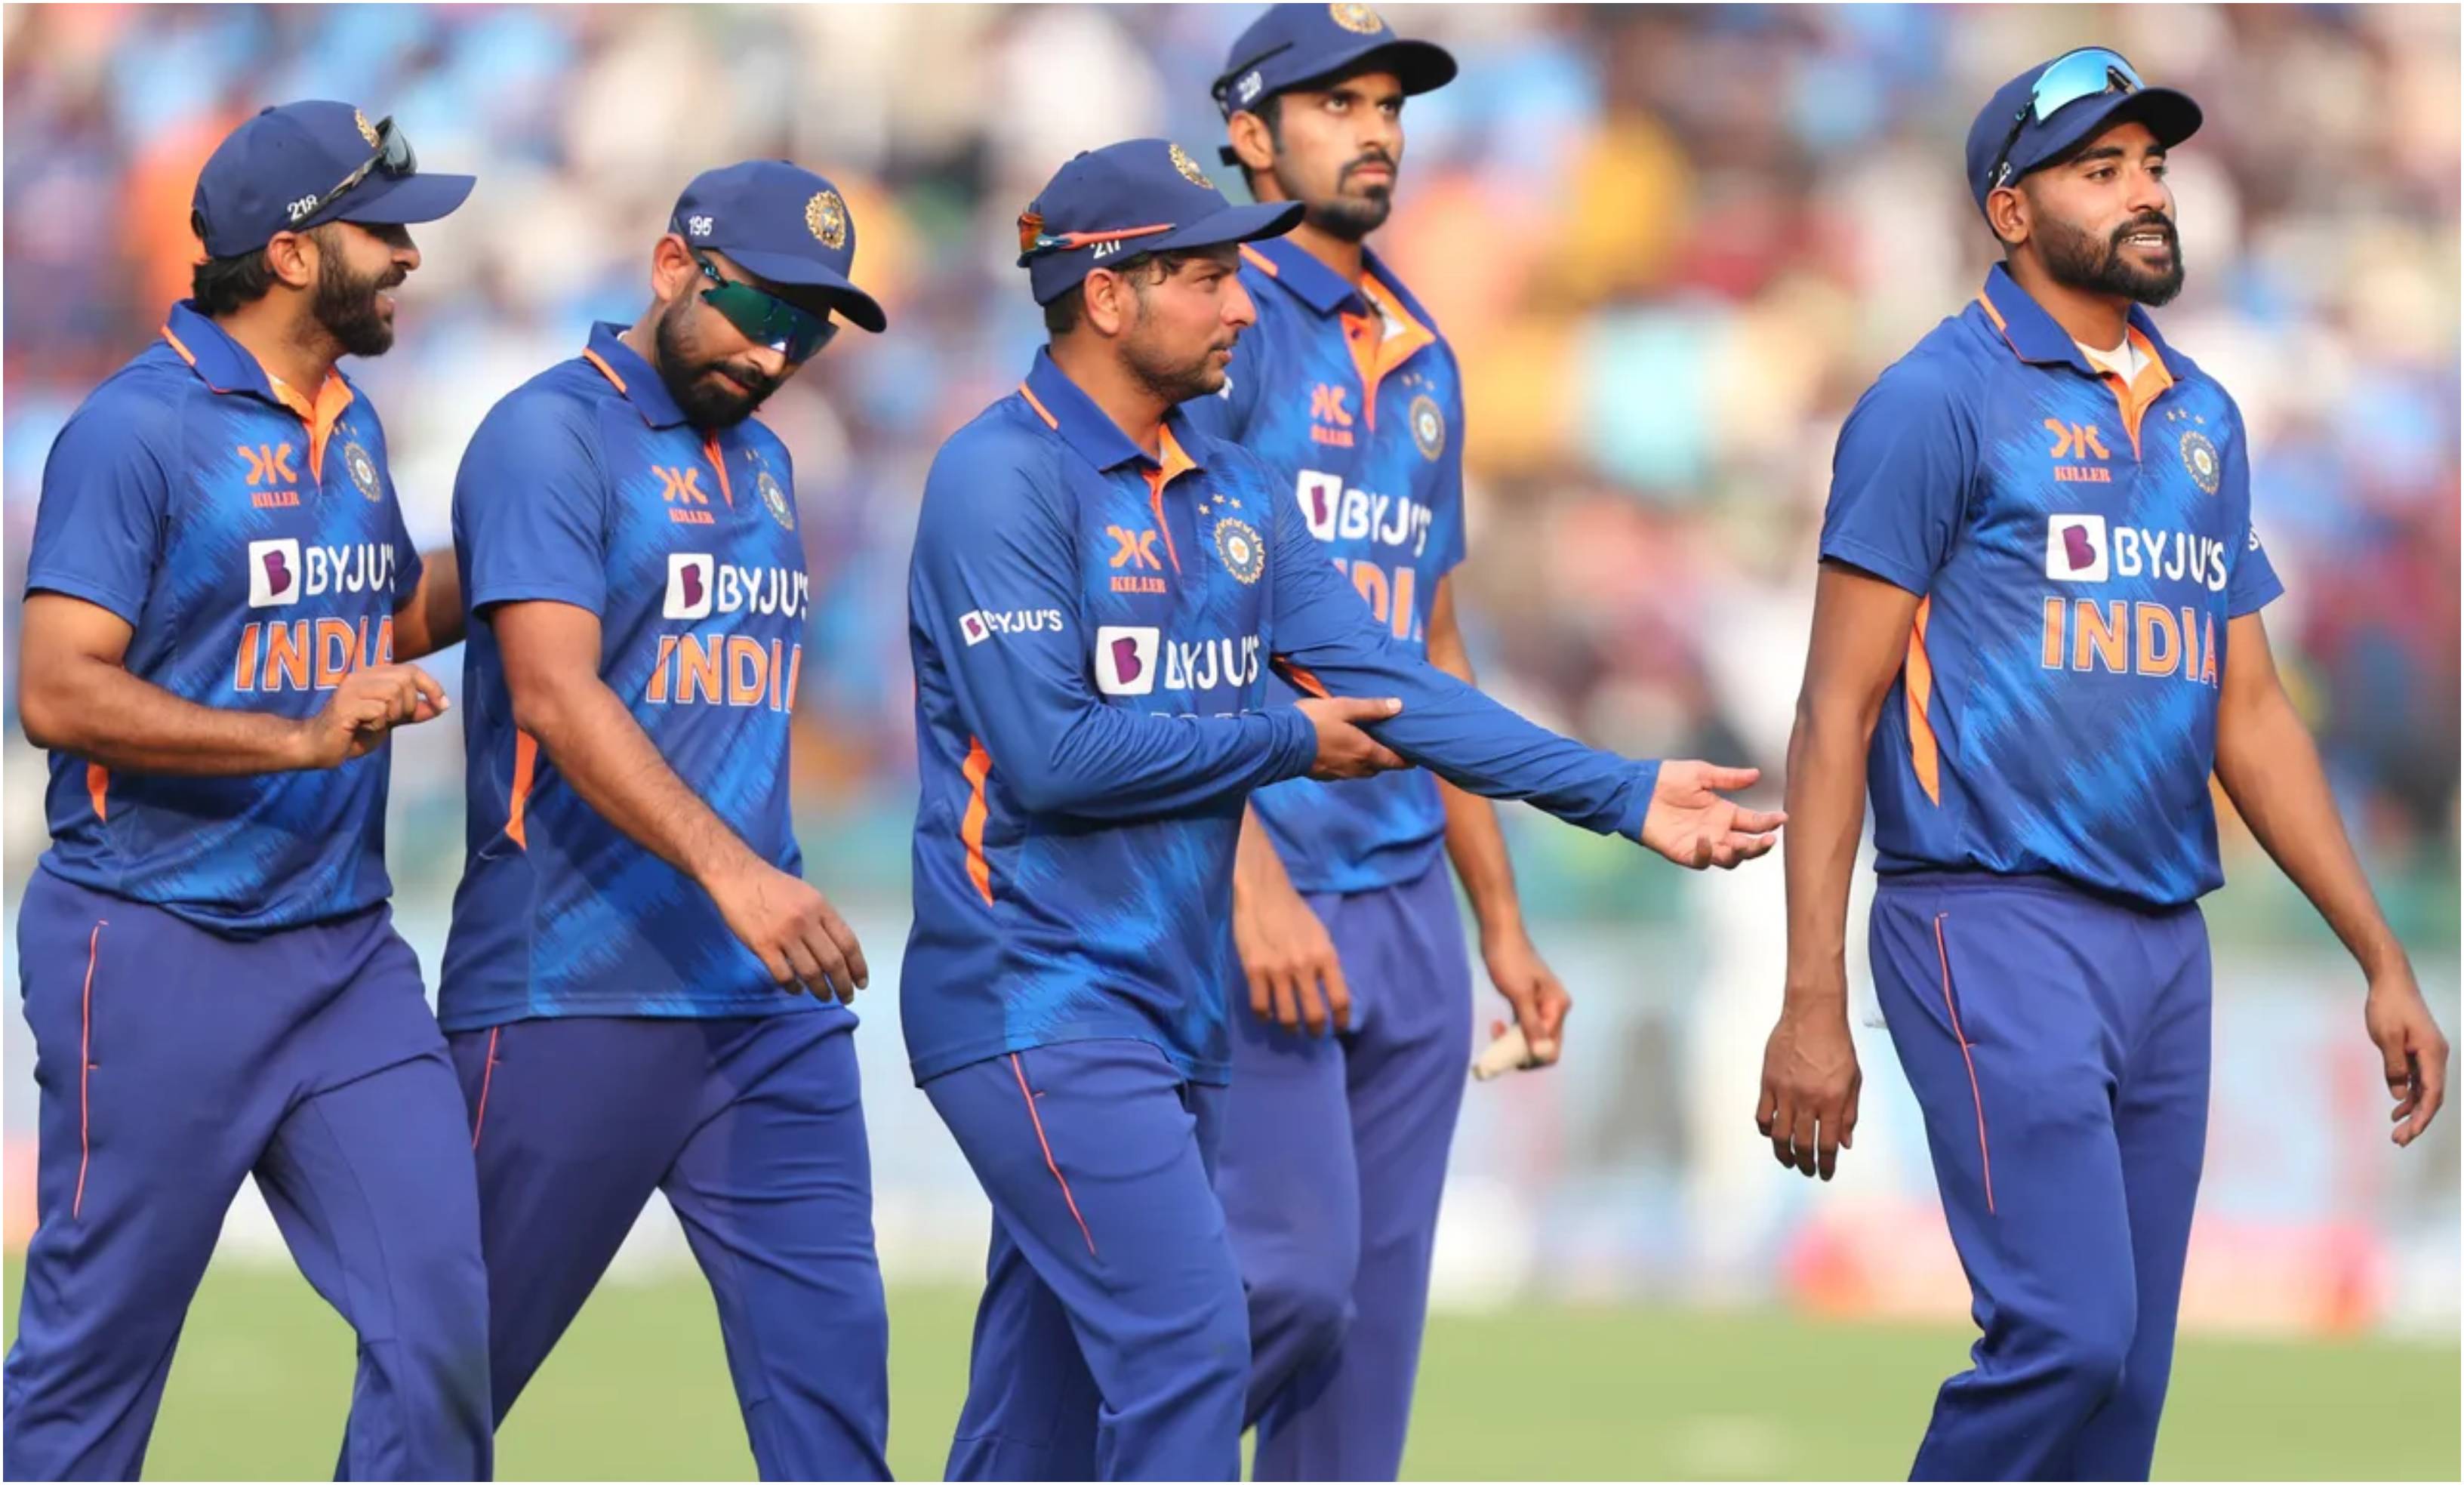 Indian bowlers have performed exceptionally well lately | BCCI